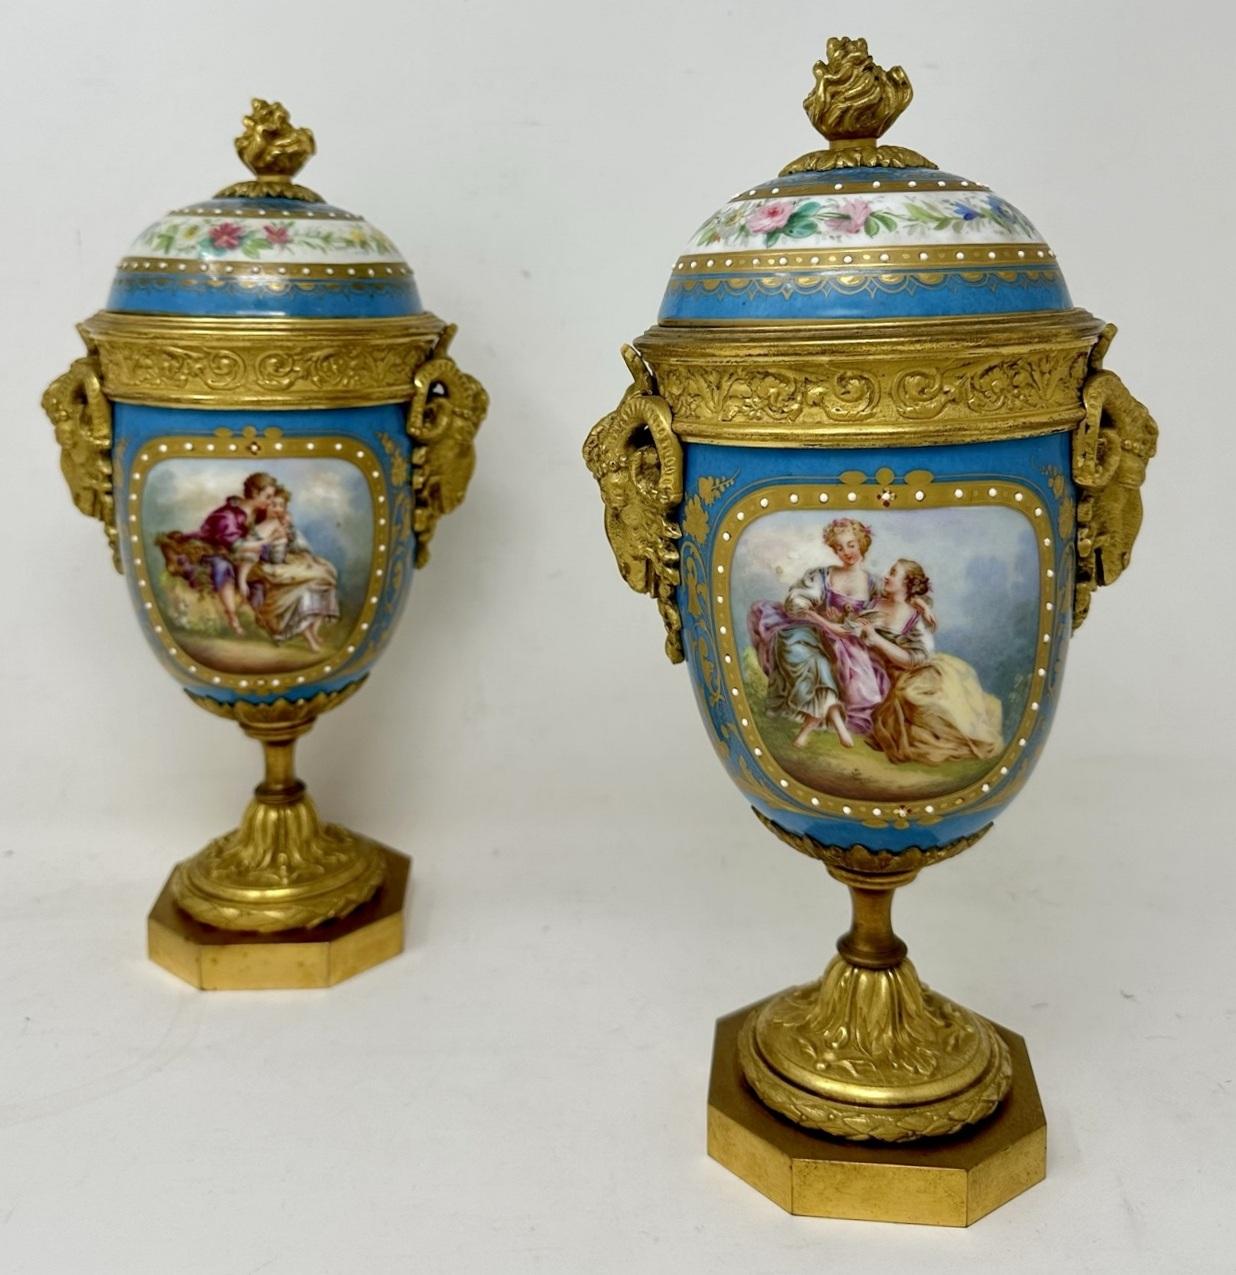 Stunning Pair of French Sevres Soft Paste Enamelled Porcelain and Ormolu Twin Handle Table or Mantle Urns of traditional urn form and of outstanding quality, and good size proportions, each raised on a square stepped base with canted corners.